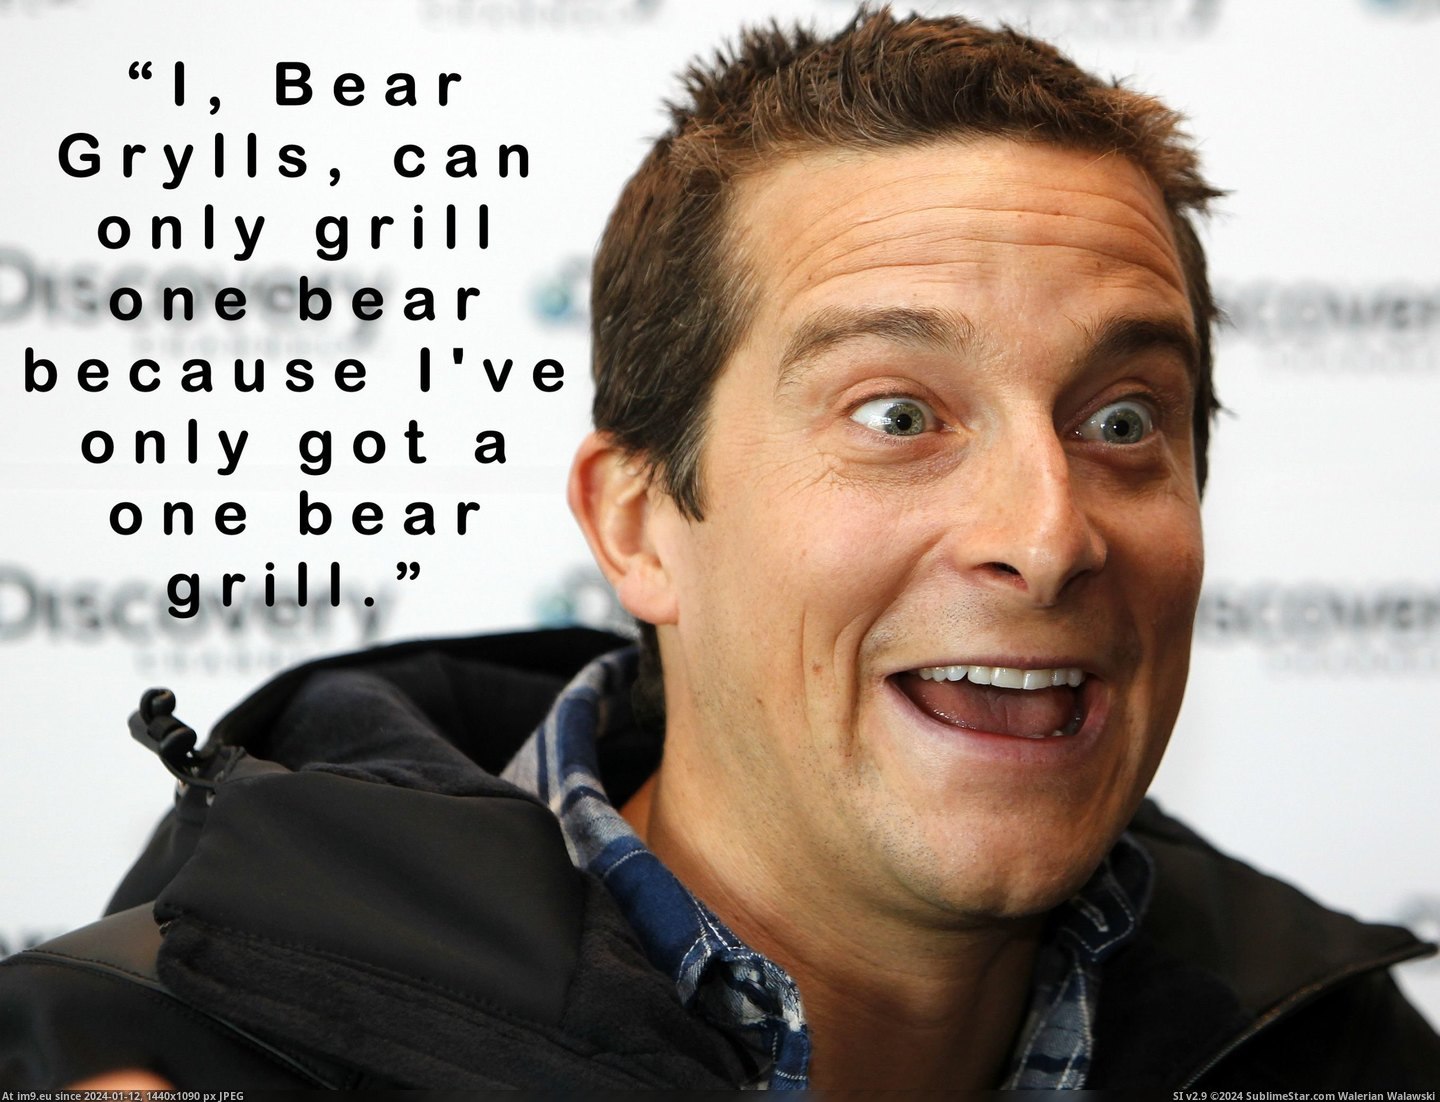 #Funny #How #Asked #Grill #Grylls #Bear #Ama #Bears [Funny] From his today's AMA: when asked how many bears could a Bear Grylls grill if Bear Grylls could grill bears, Bear Grylls  Pic. (Изображение из альбом My r/FUNNY favs))